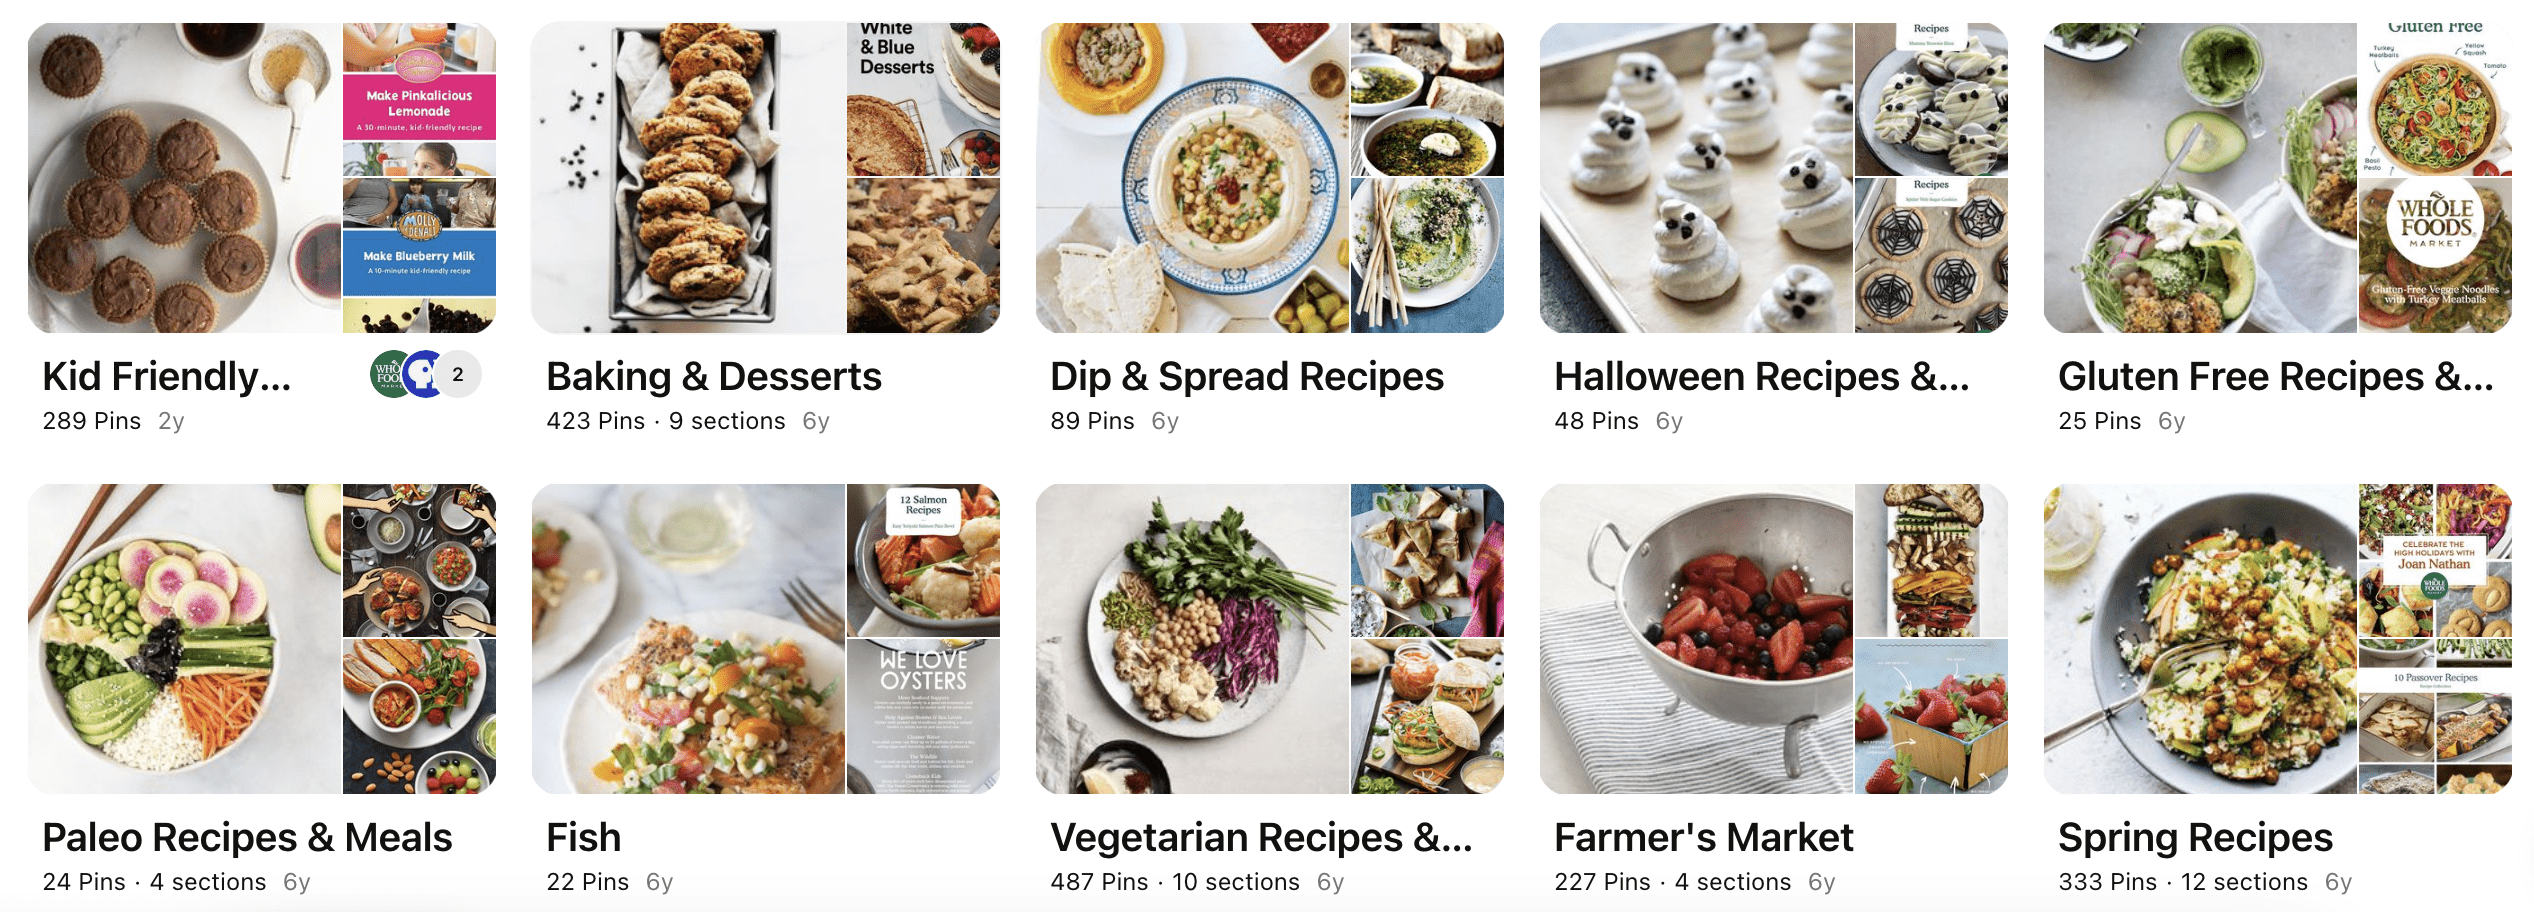 Wholefoods Pinterest collection